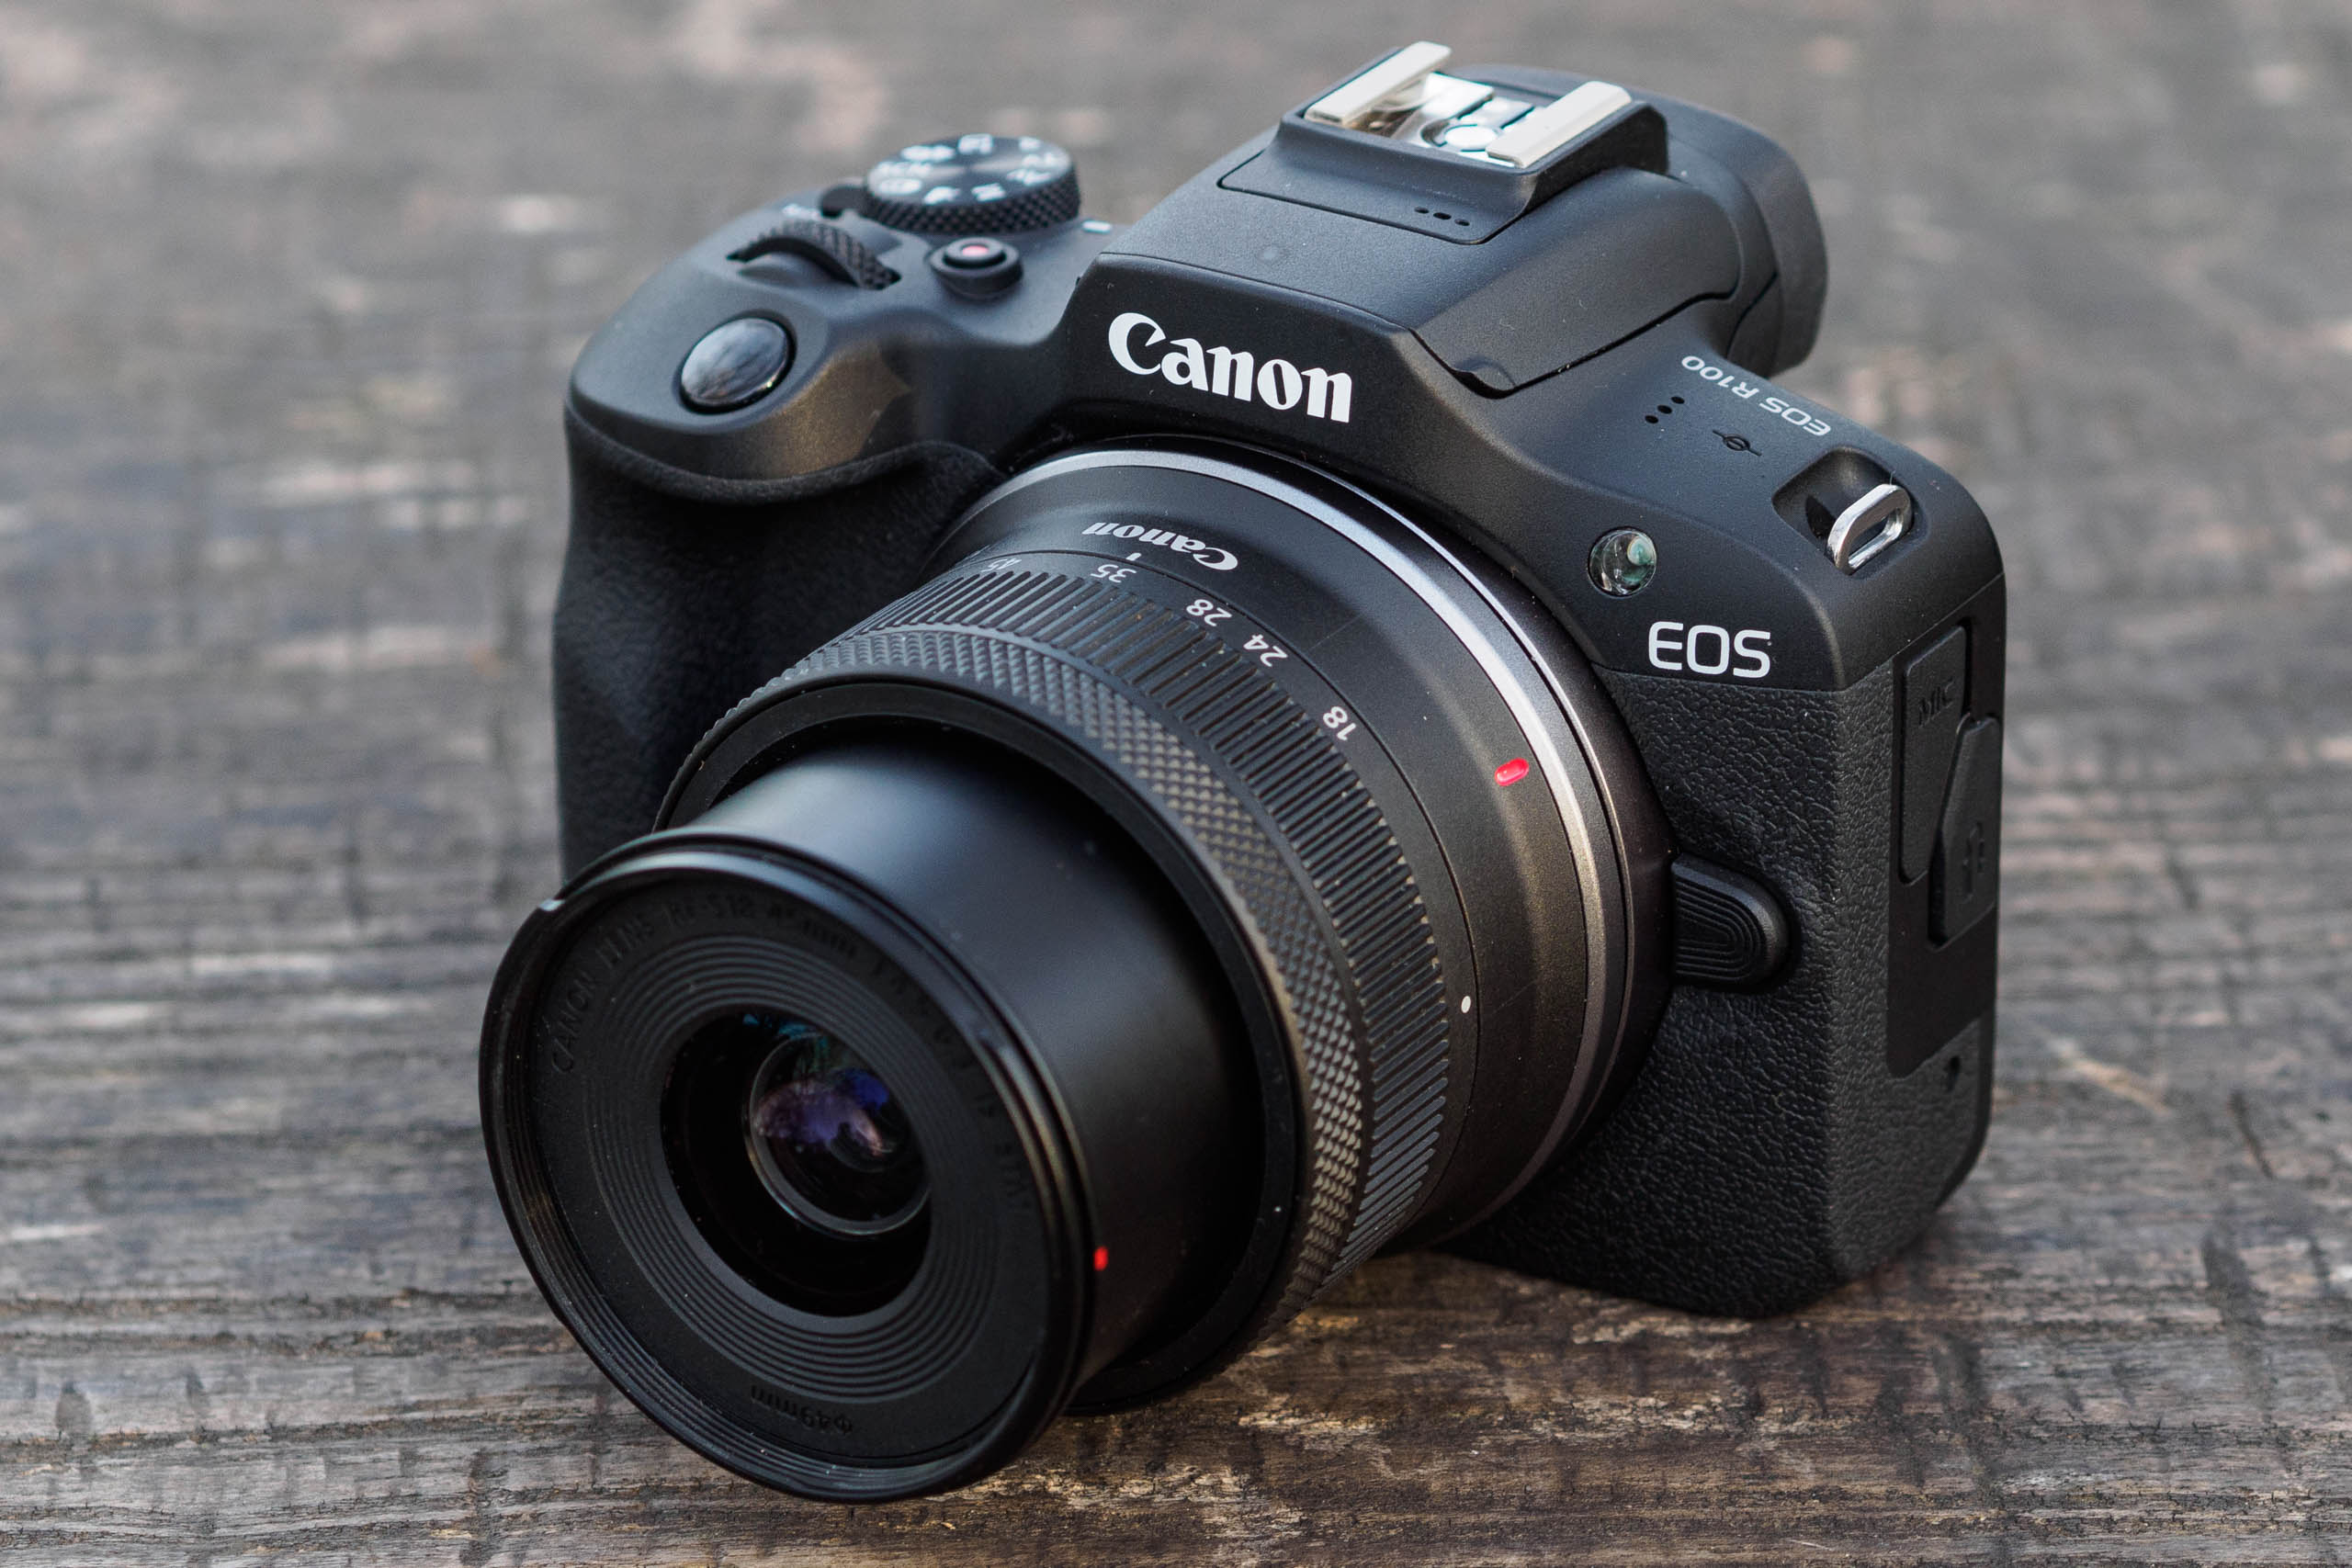 Introducing the Canon EOS R100 - For Life's Most Precious Memories 